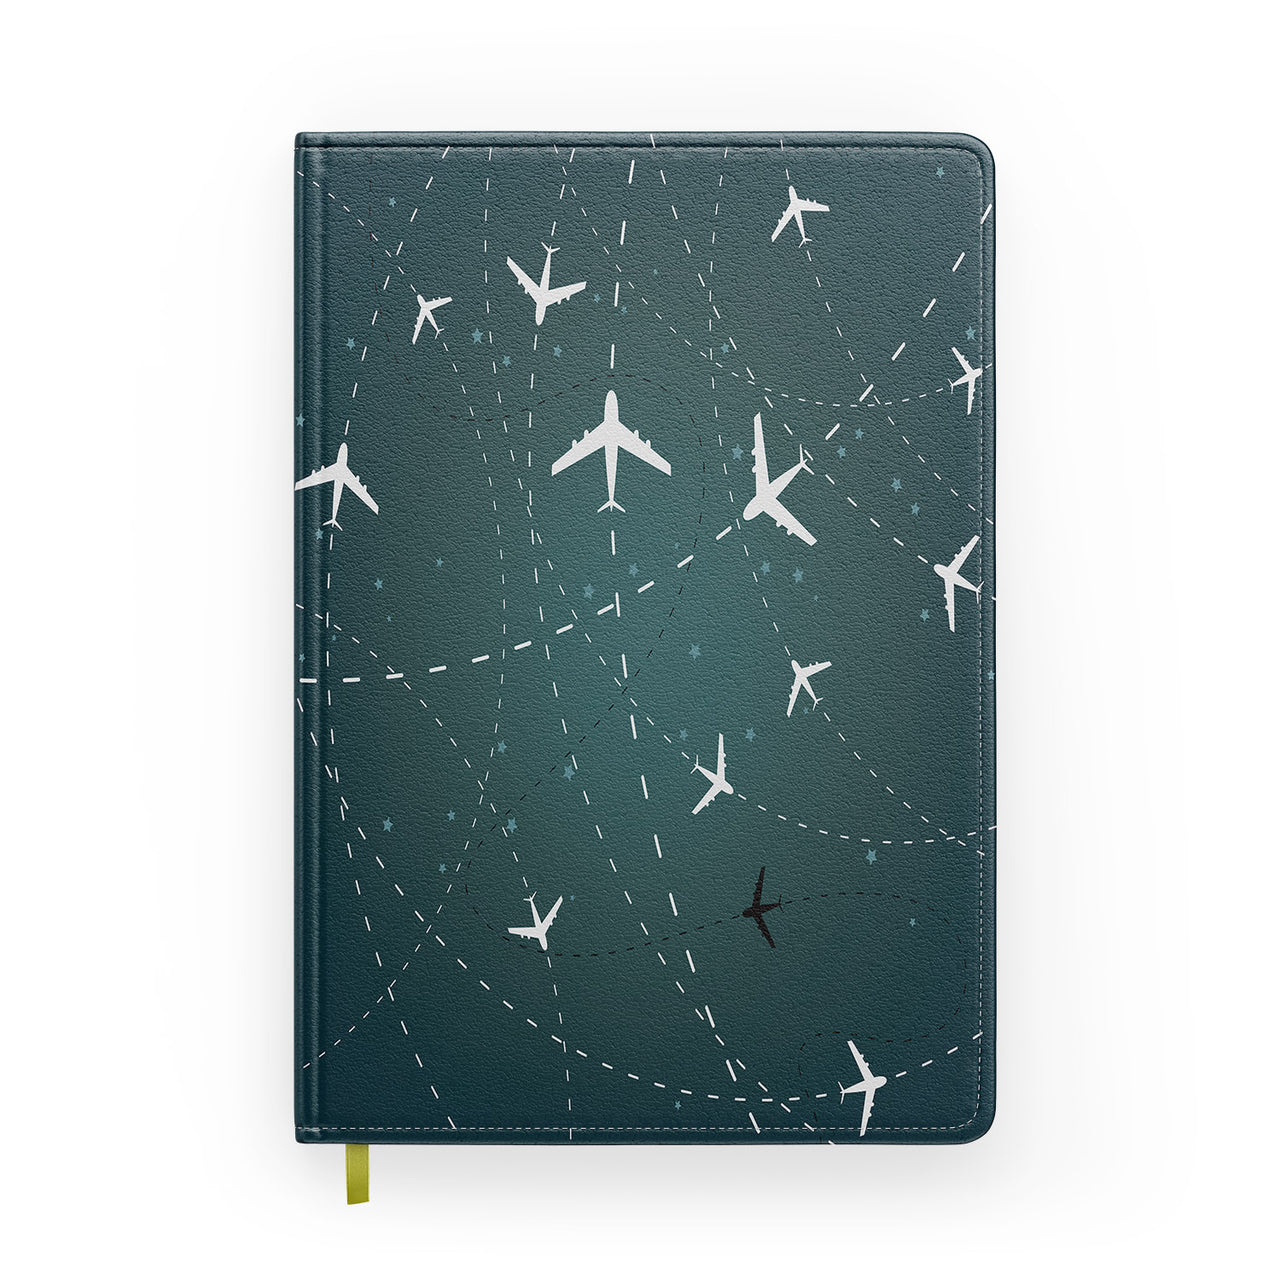 Travelling with Aircraft Designed Notebooks